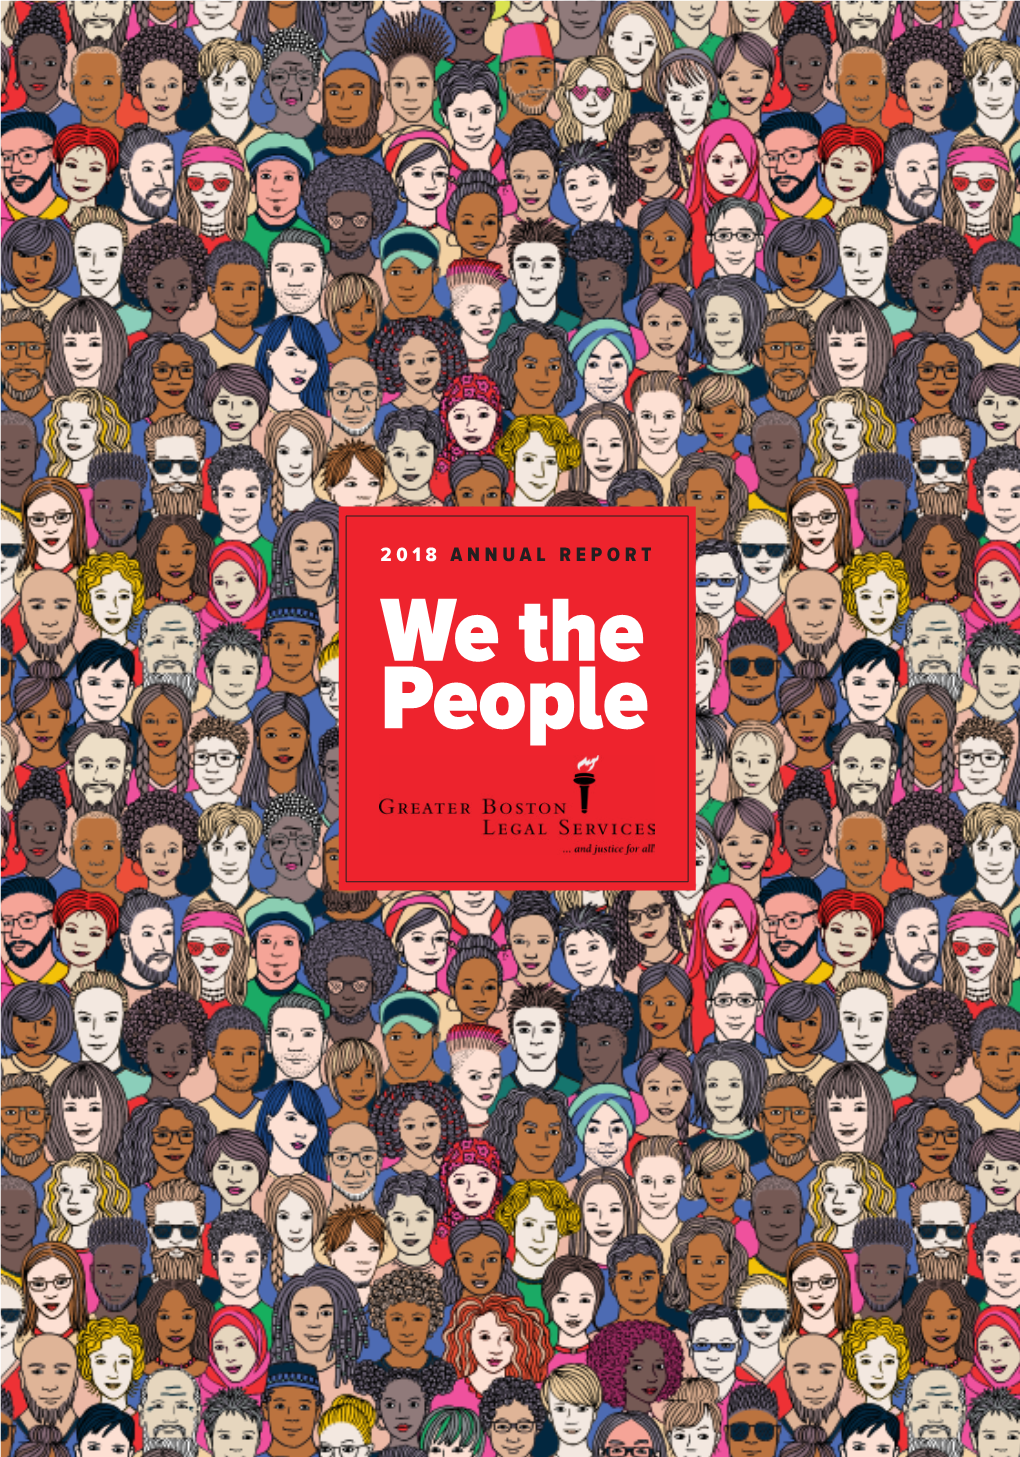 We the People in THIS REPORT